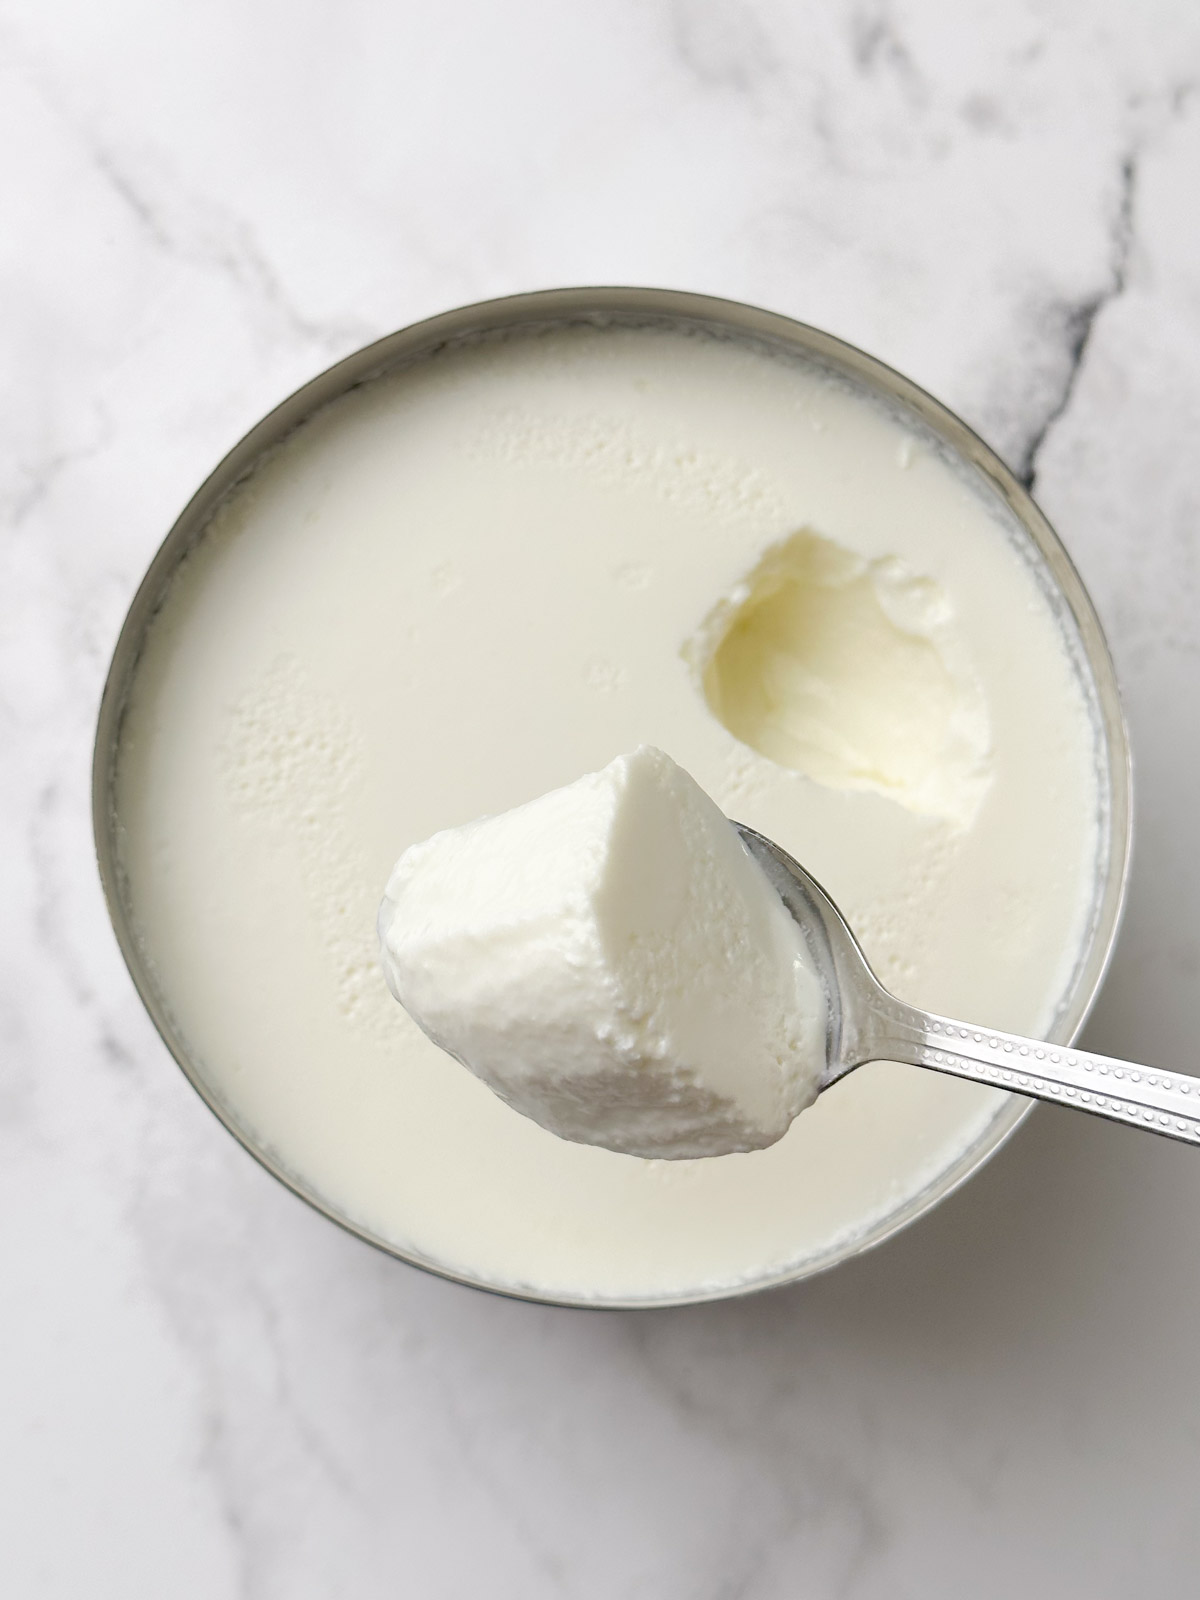 curd in a spoon with a container full of yogurt